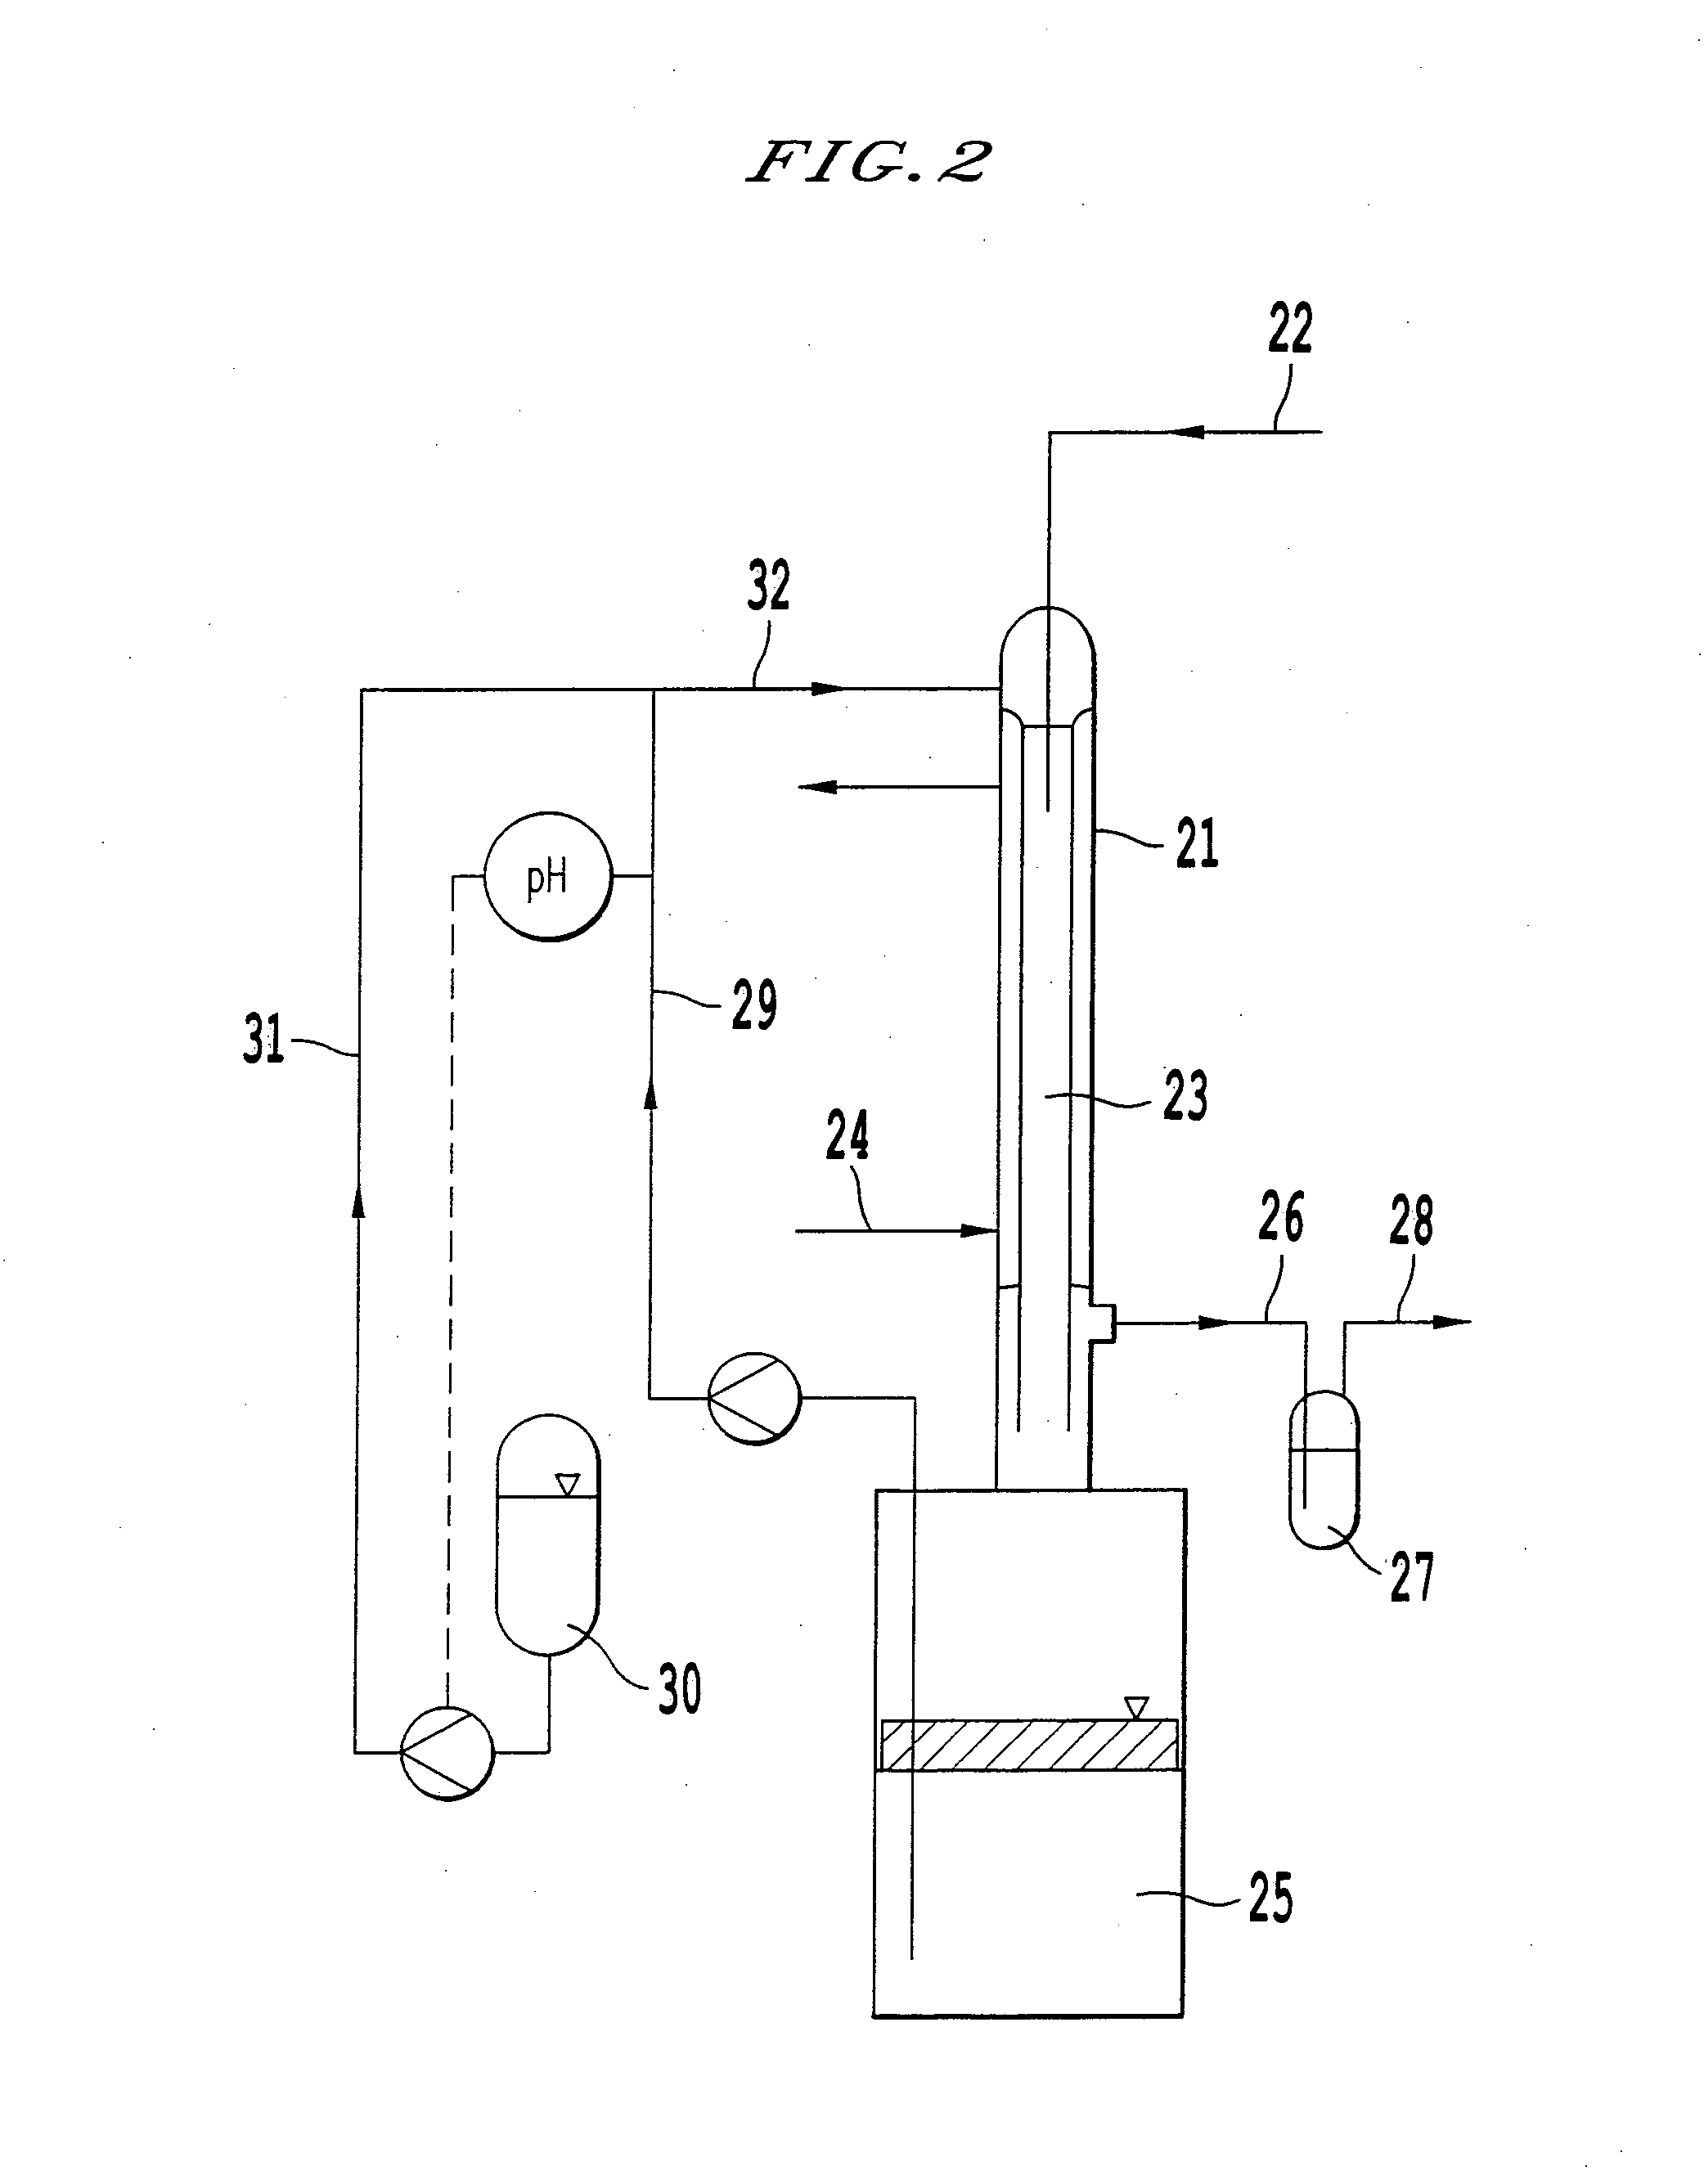 Process for the separation of chlorosilanes from gas streams